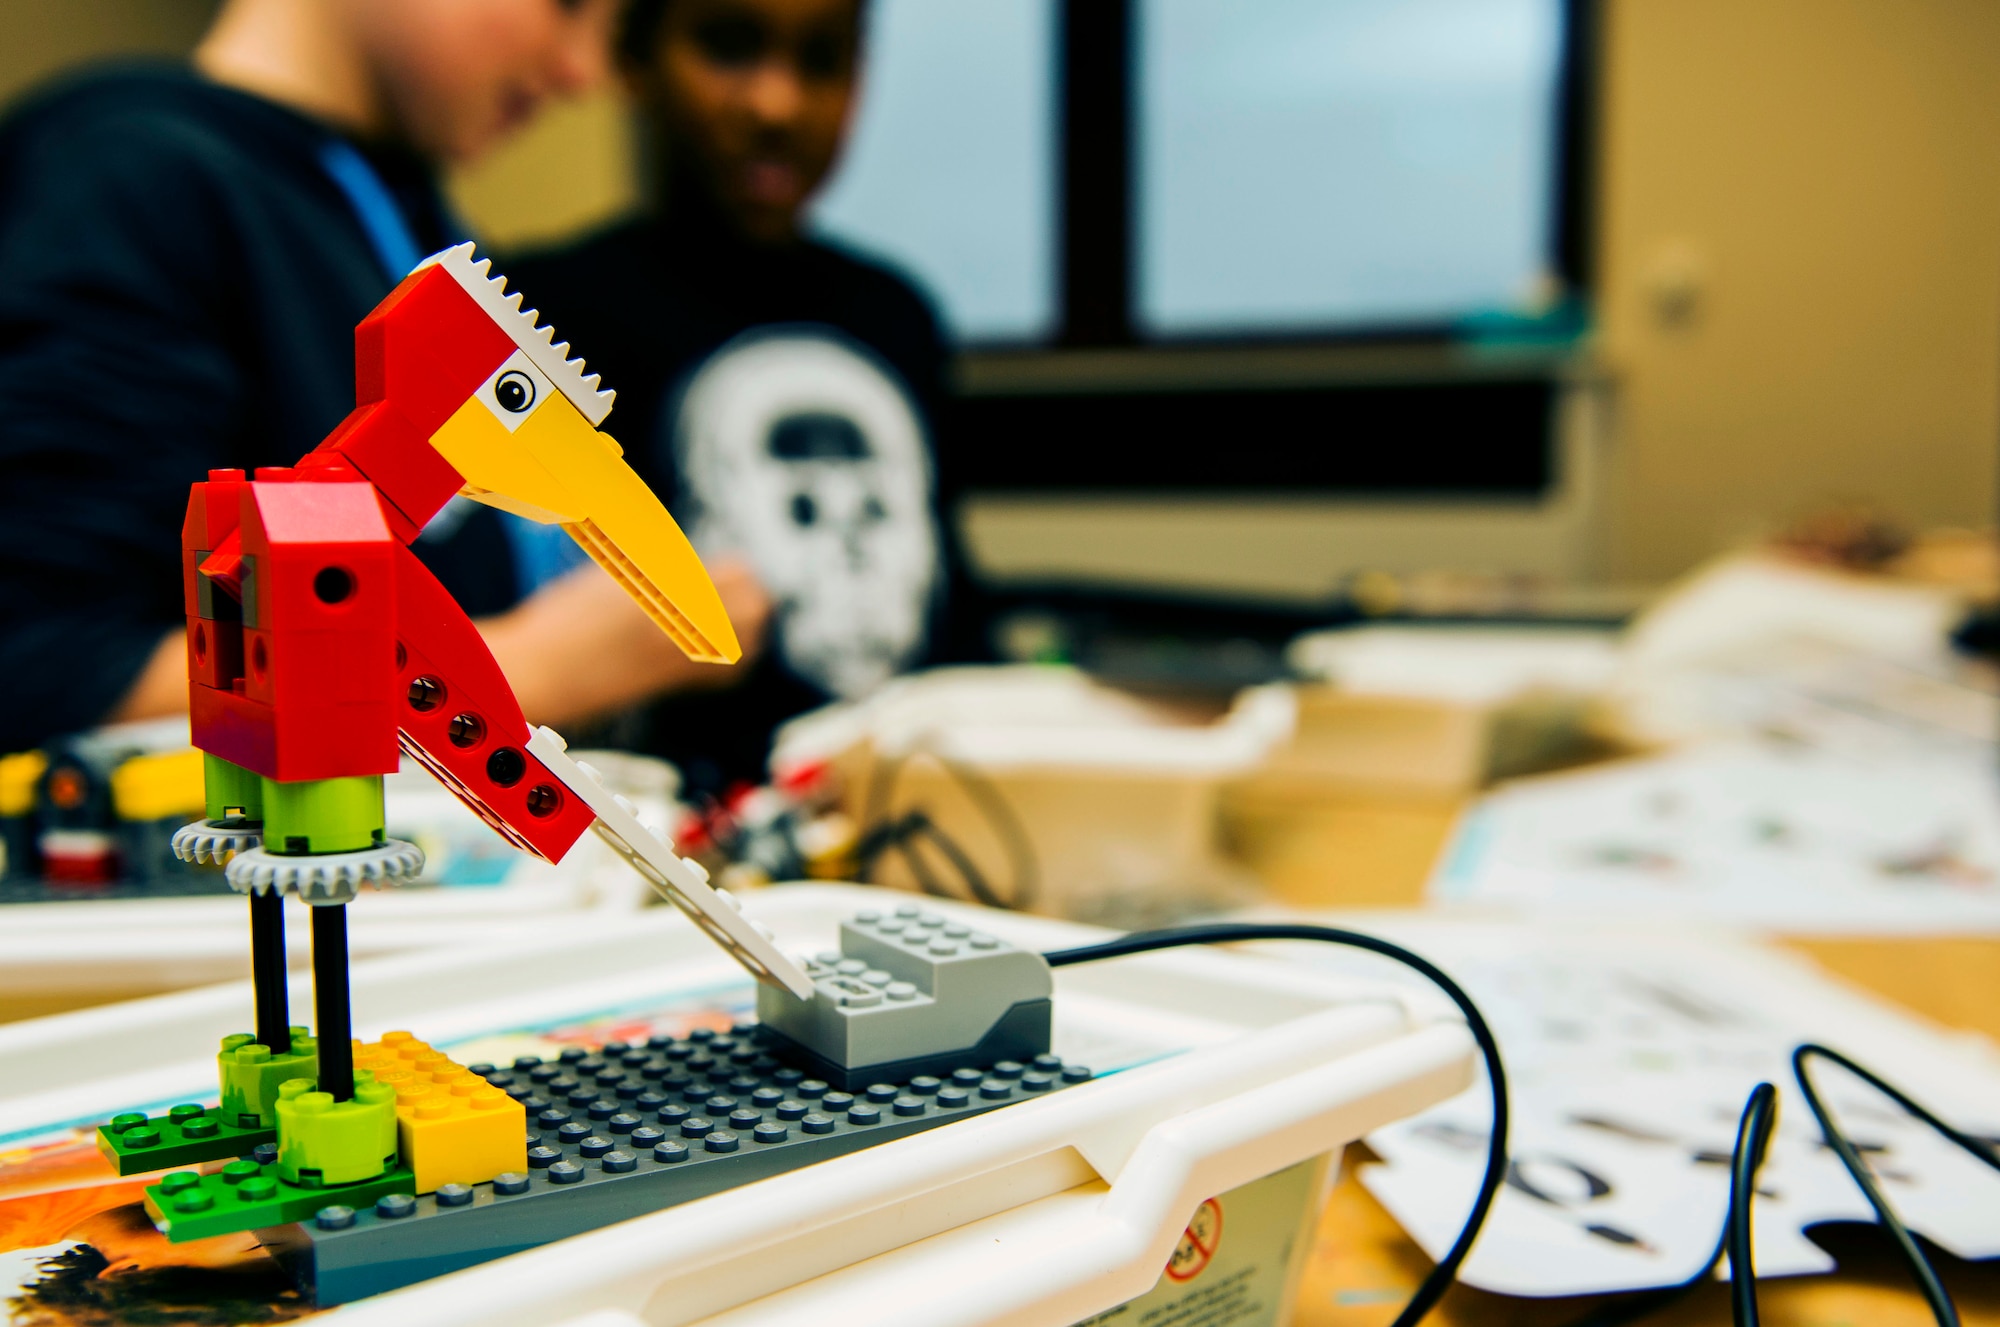 Jackson Sansosti, left, and Jayden Johnson work on building robots with Legos building blocks during the Power Hour in the School Age Program building at Spangdahlem Air Base, Germany, Nov. 10, 2015. Students are encouraged to do their homework, but are also given free rein to engage in other educational hobbies, such as robotics, literature and music. (U.S. Air Force photo by Airman 1st Class Timothy Kim/Released)